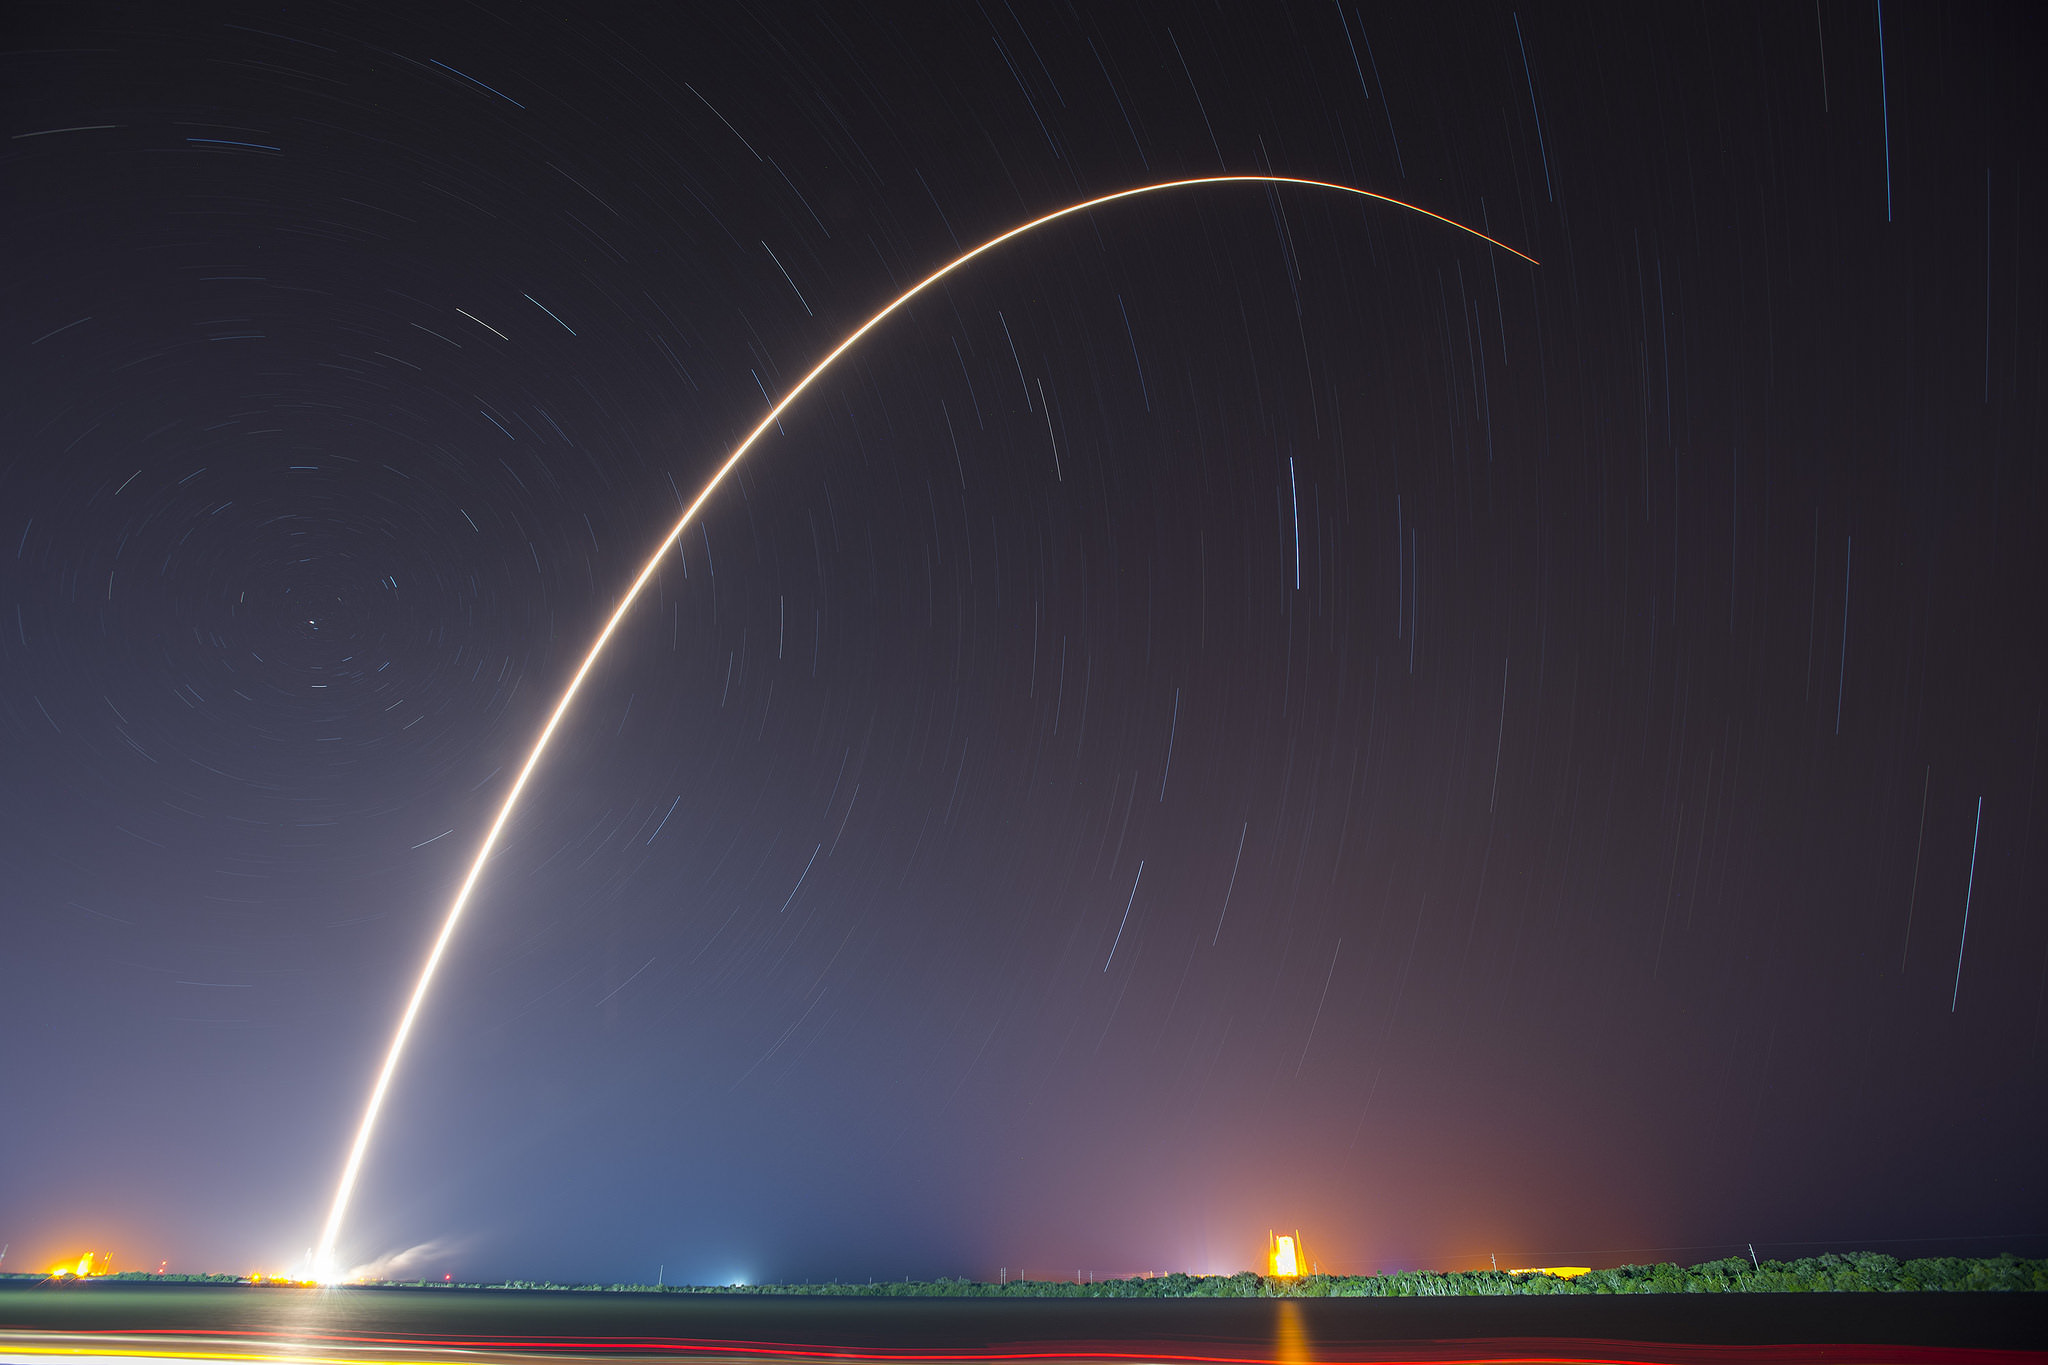 Streak shot of SpaceX Falcon 9 delivering JCSAT-14 Japanese communications satellite to orbit after blastoff on May 6, 2016 at 1:21 a.m. EDT from Space Launch Complex 40 at Cape Canaveral Air Force Station, Fl.  Credit: SpaceX